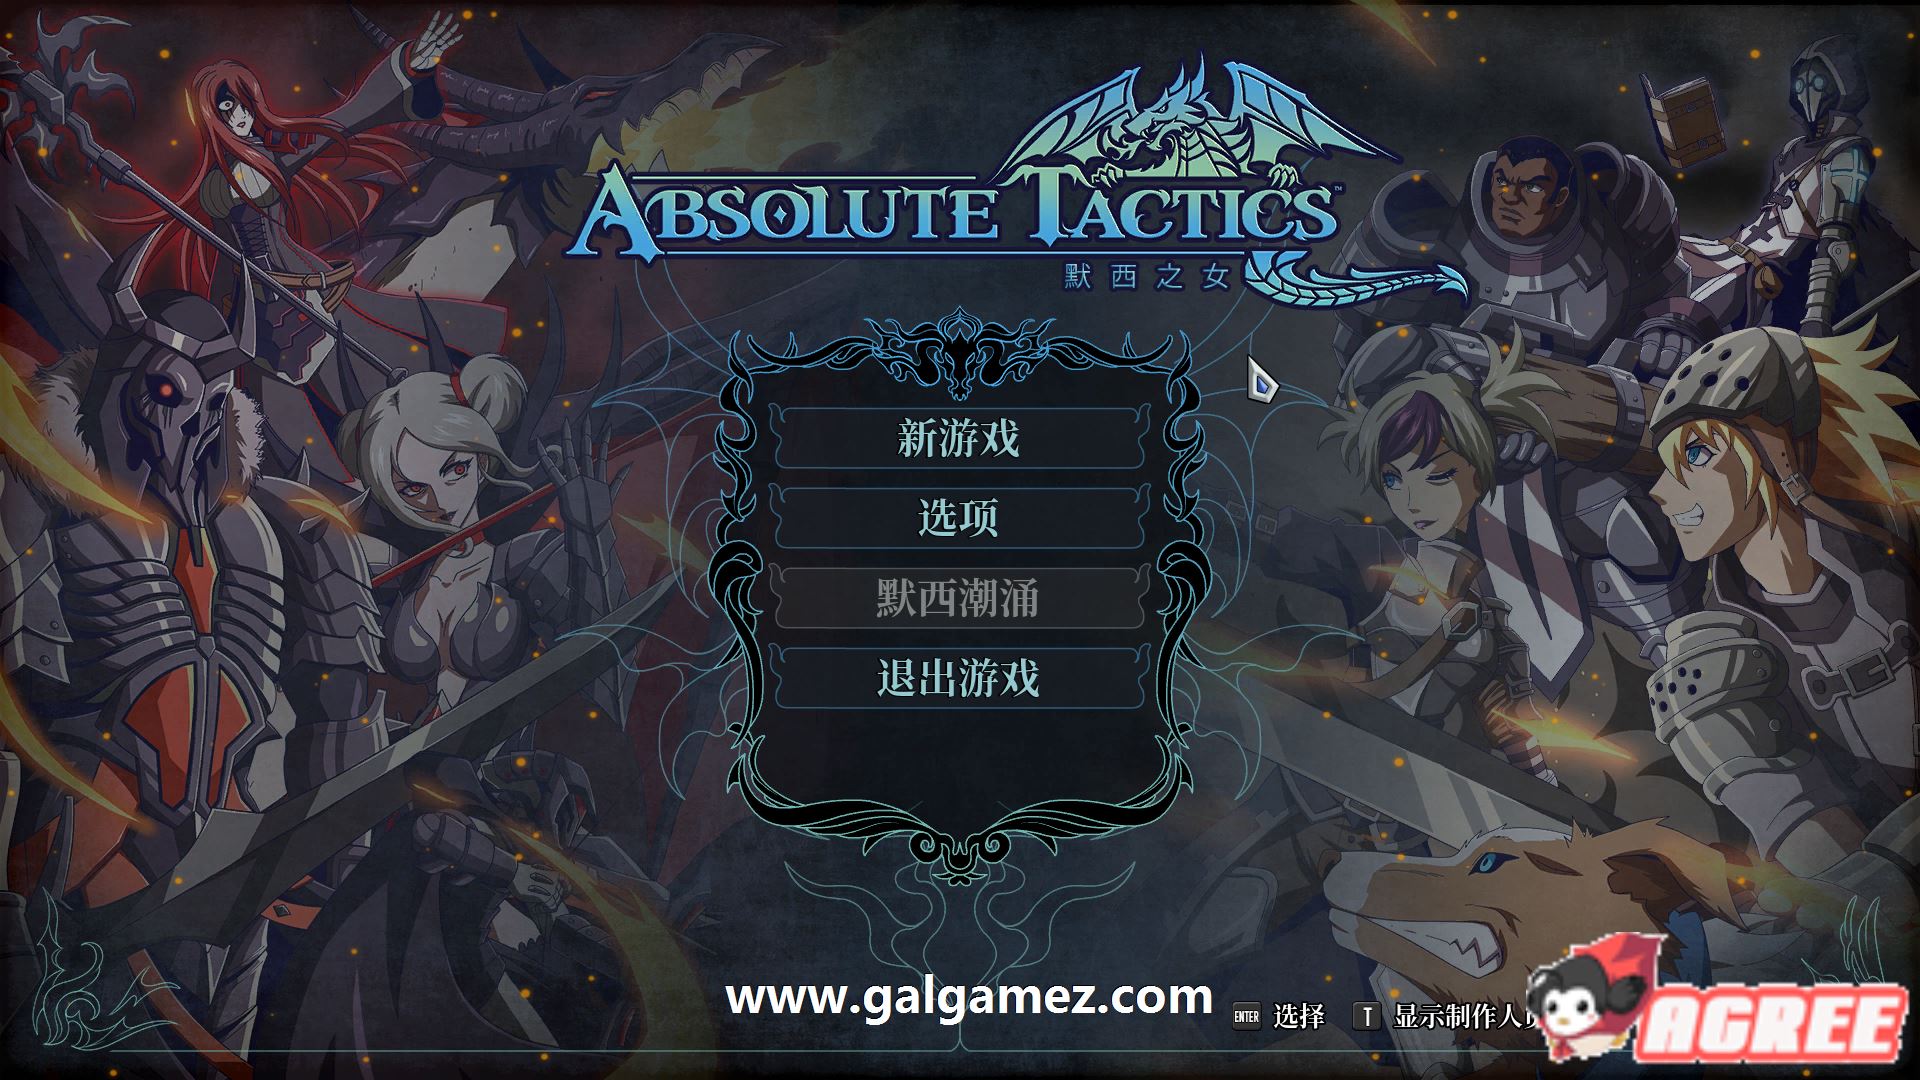 Absolute gaming. Absolute Tactics: daughters of Mercy. Игра Абсолюта. Absolute Tactics дочери аскезы. Absolute Tactics: daughters of Mercy Switch.